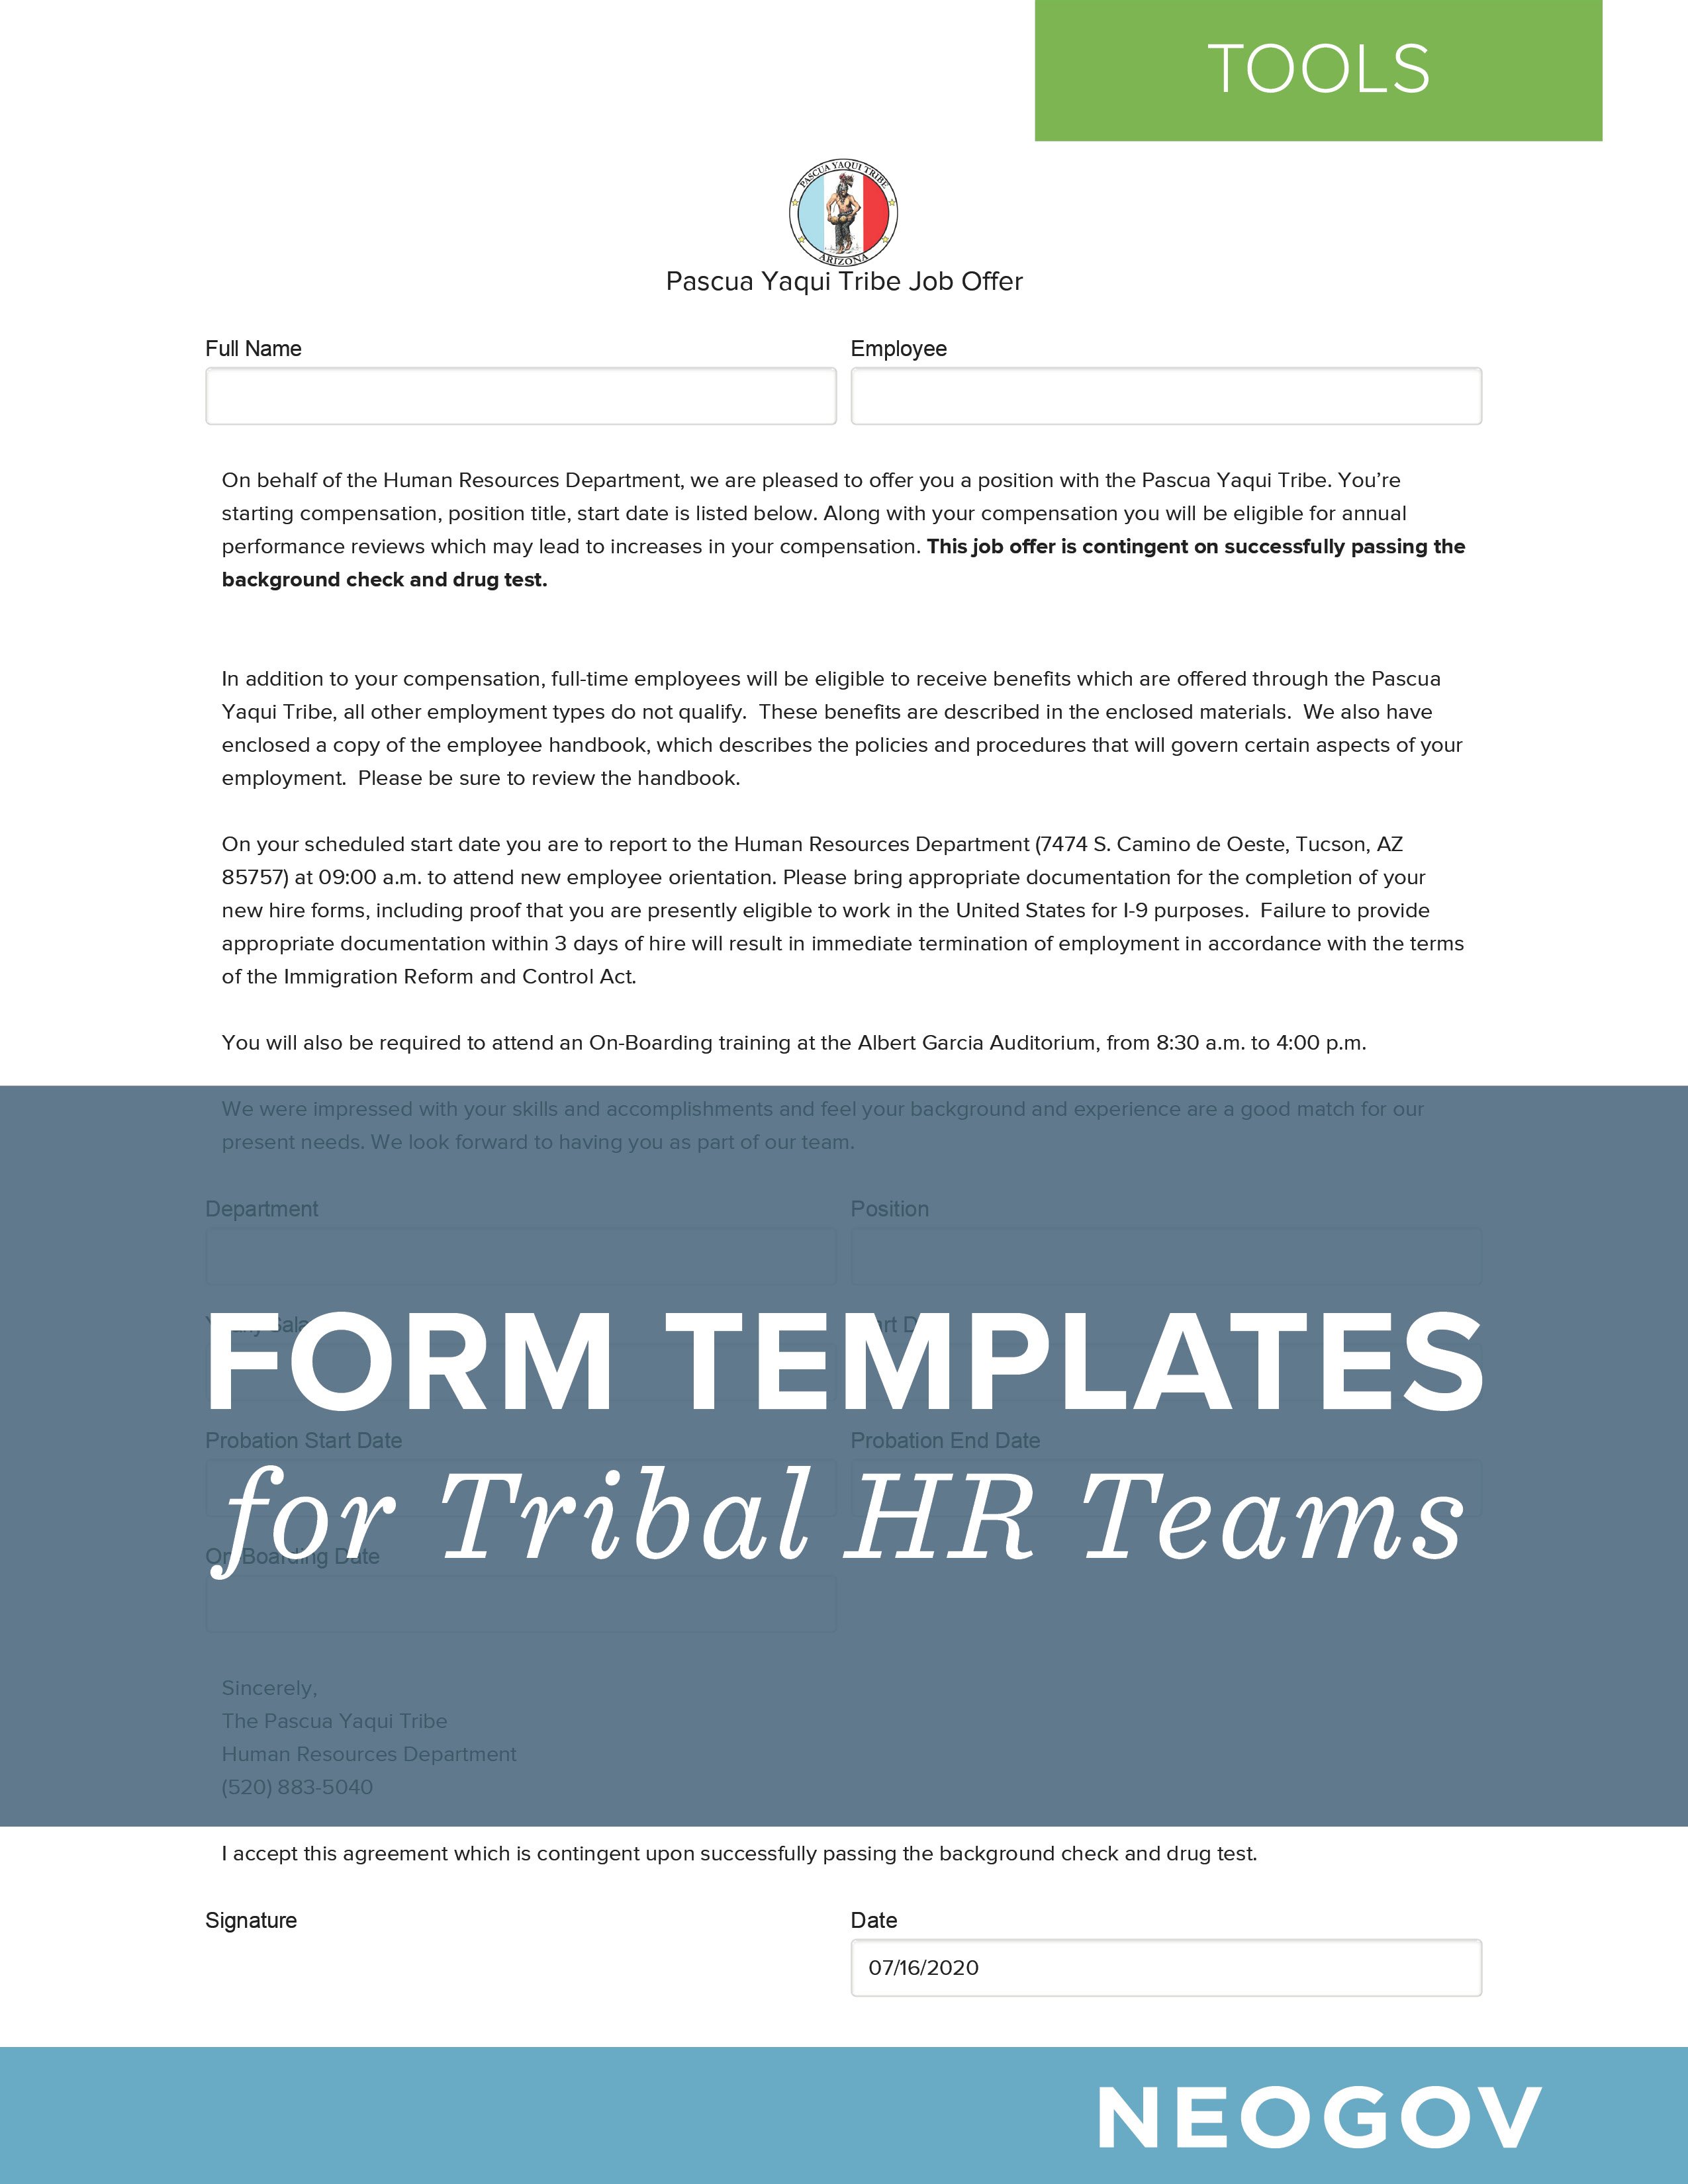 Form Templates for Tribal HR Teams